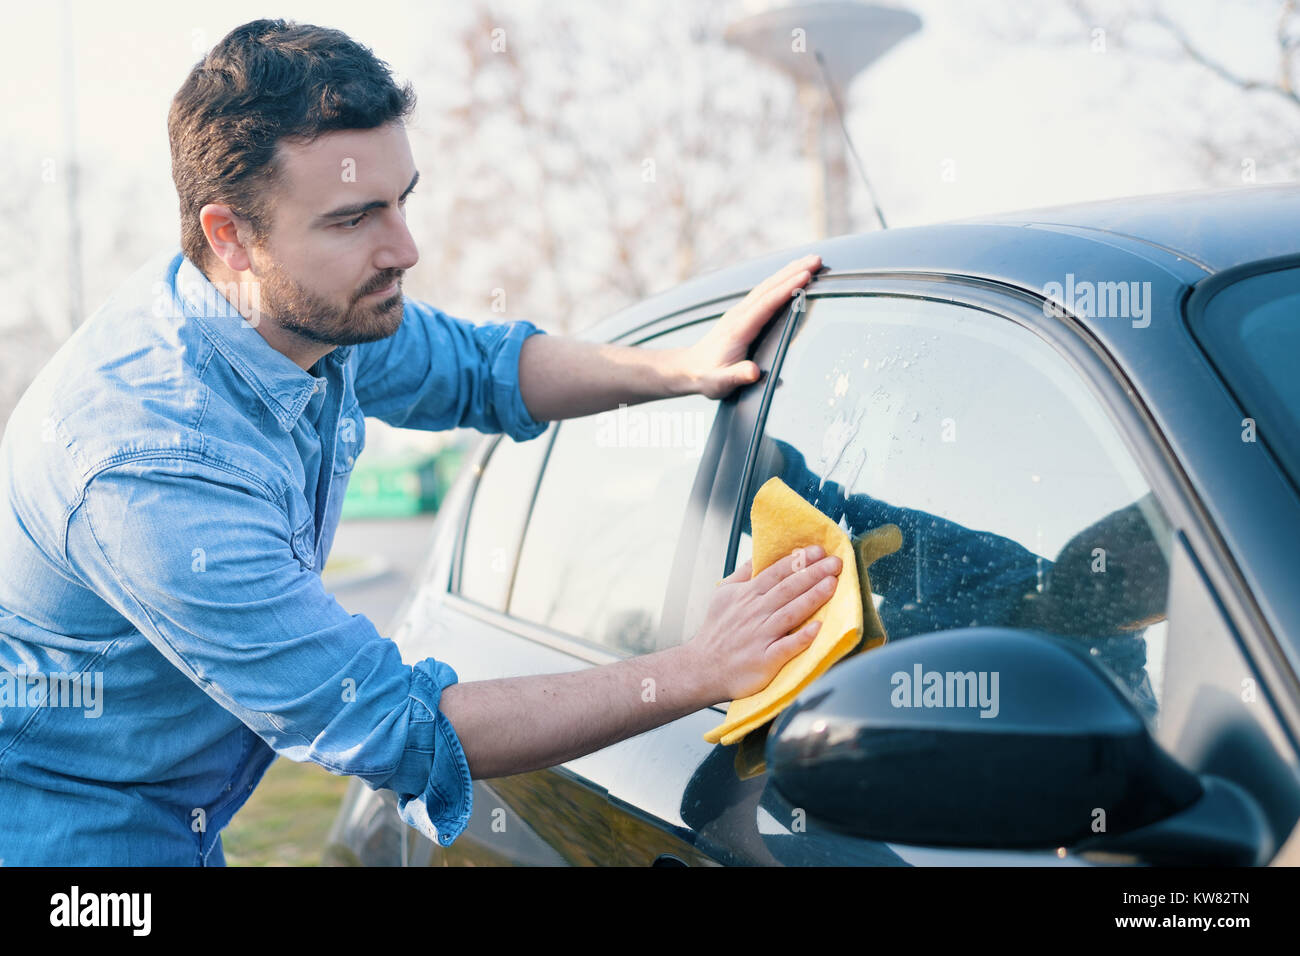 Man taking care and cleaning his new car Stock Photo